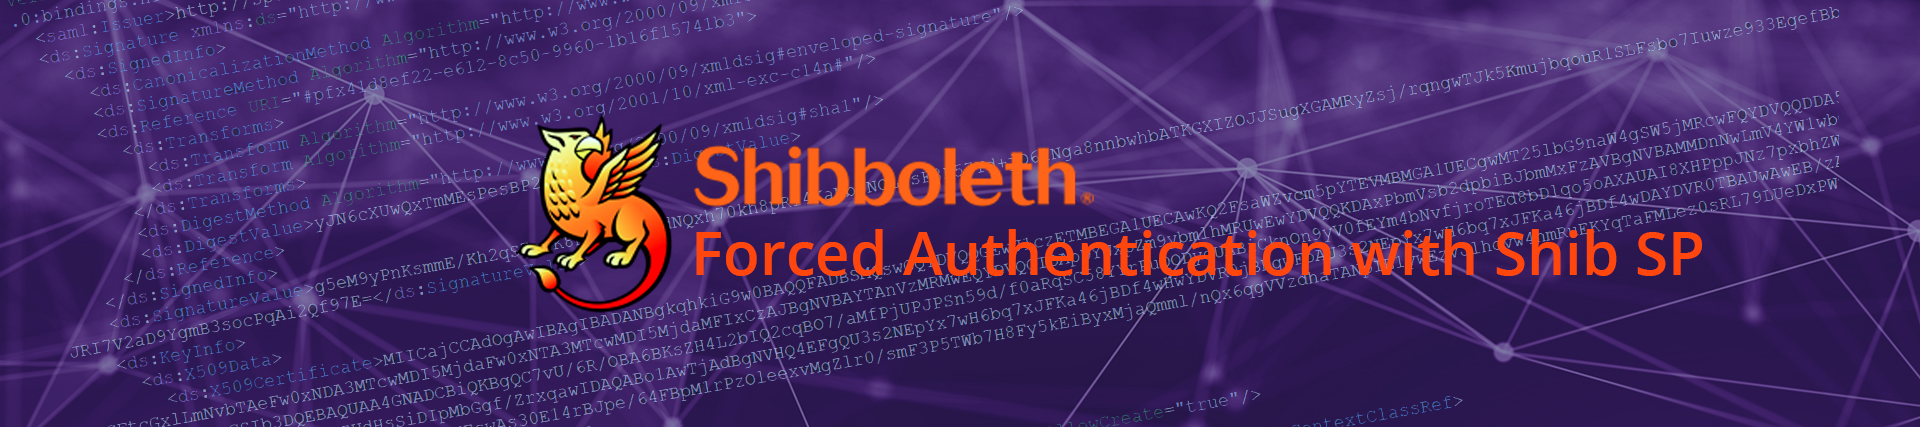 Forced Authentication with Shibboleth SP